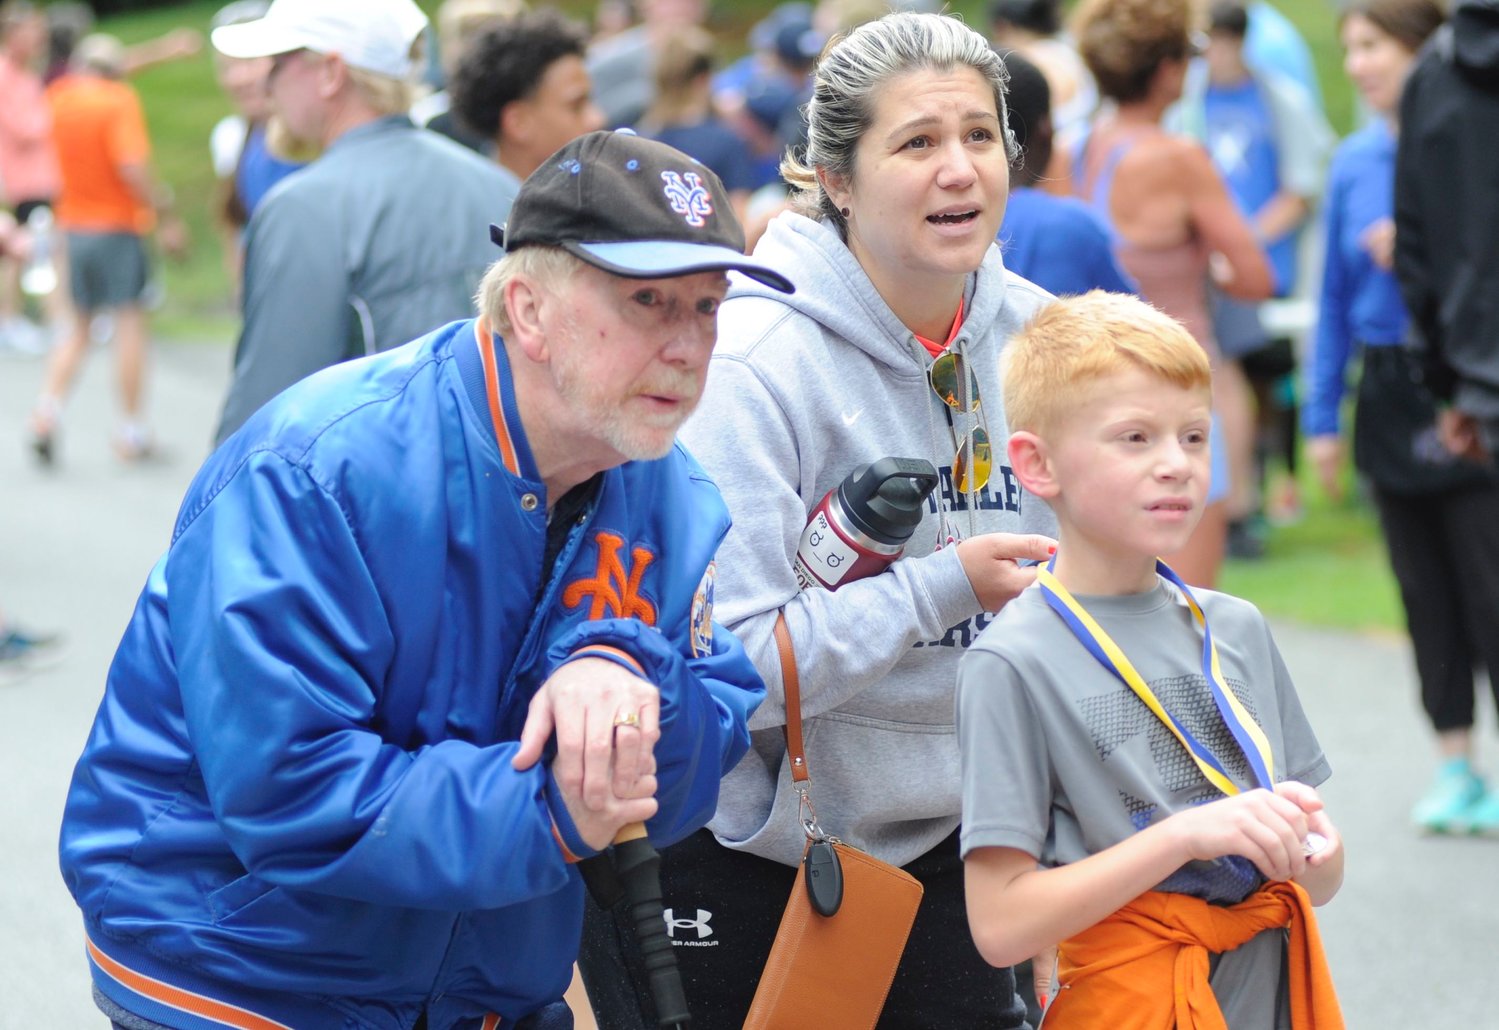 At the finish line. Nine-year-old Bradley Kenney, a third-grader at  Tri-Valley,  took first place in the male 10 and under category, and completed the race 69th overall with a time of 24:10. He is pictured with Edward Kenney, left, the young runner’s grandfather; and his mom Michelle.